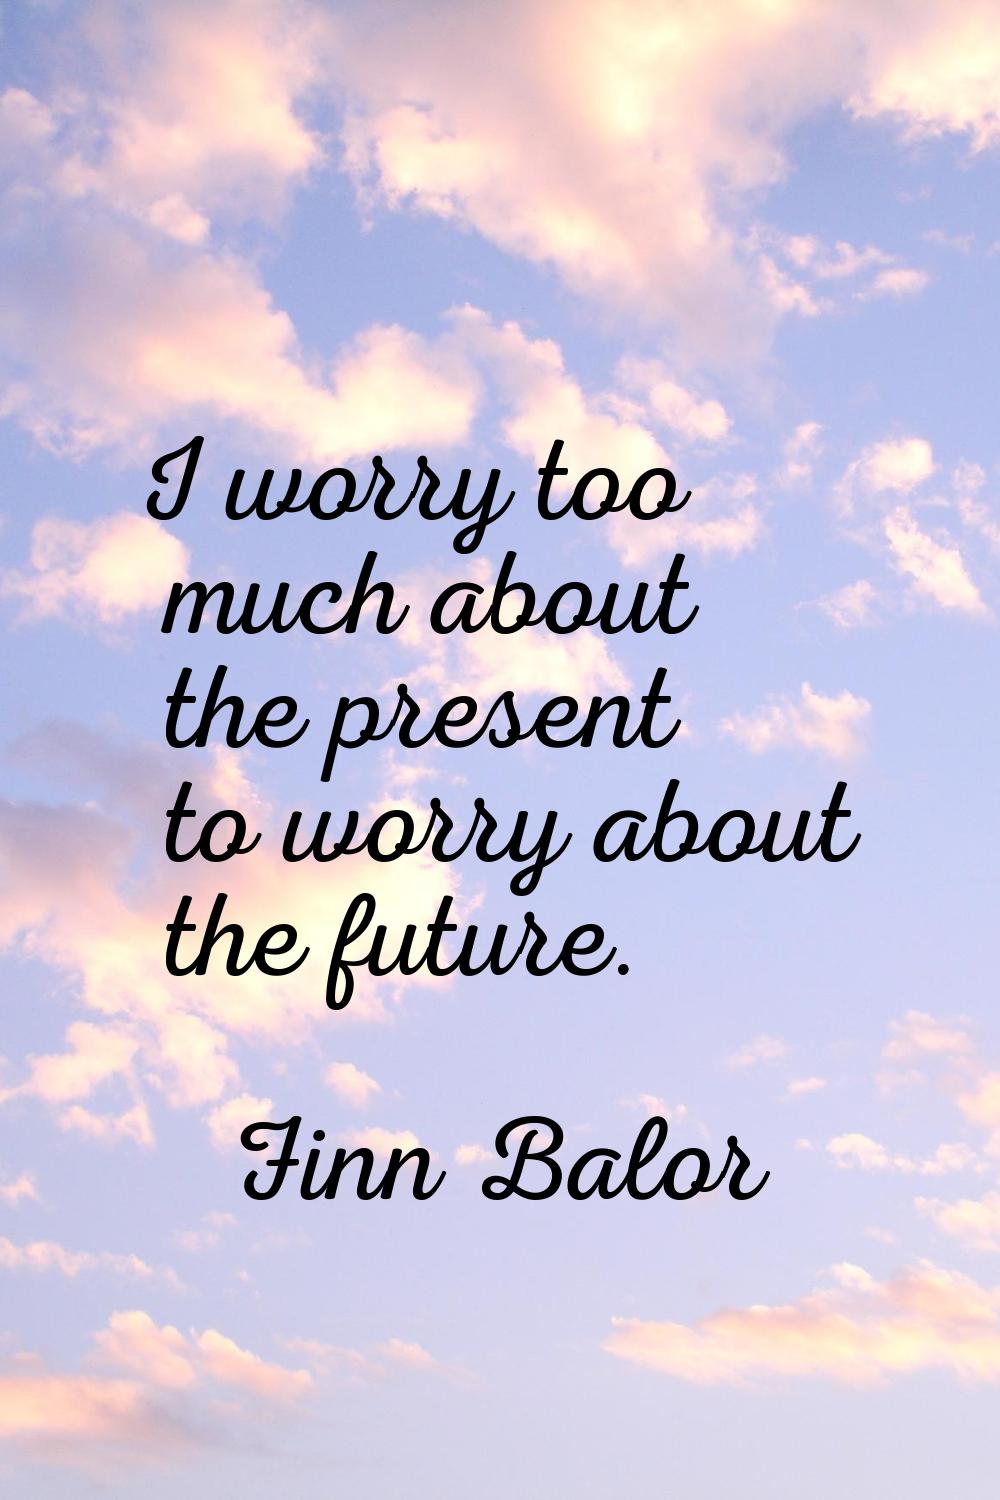 I worry too much about the present to worry about the future.